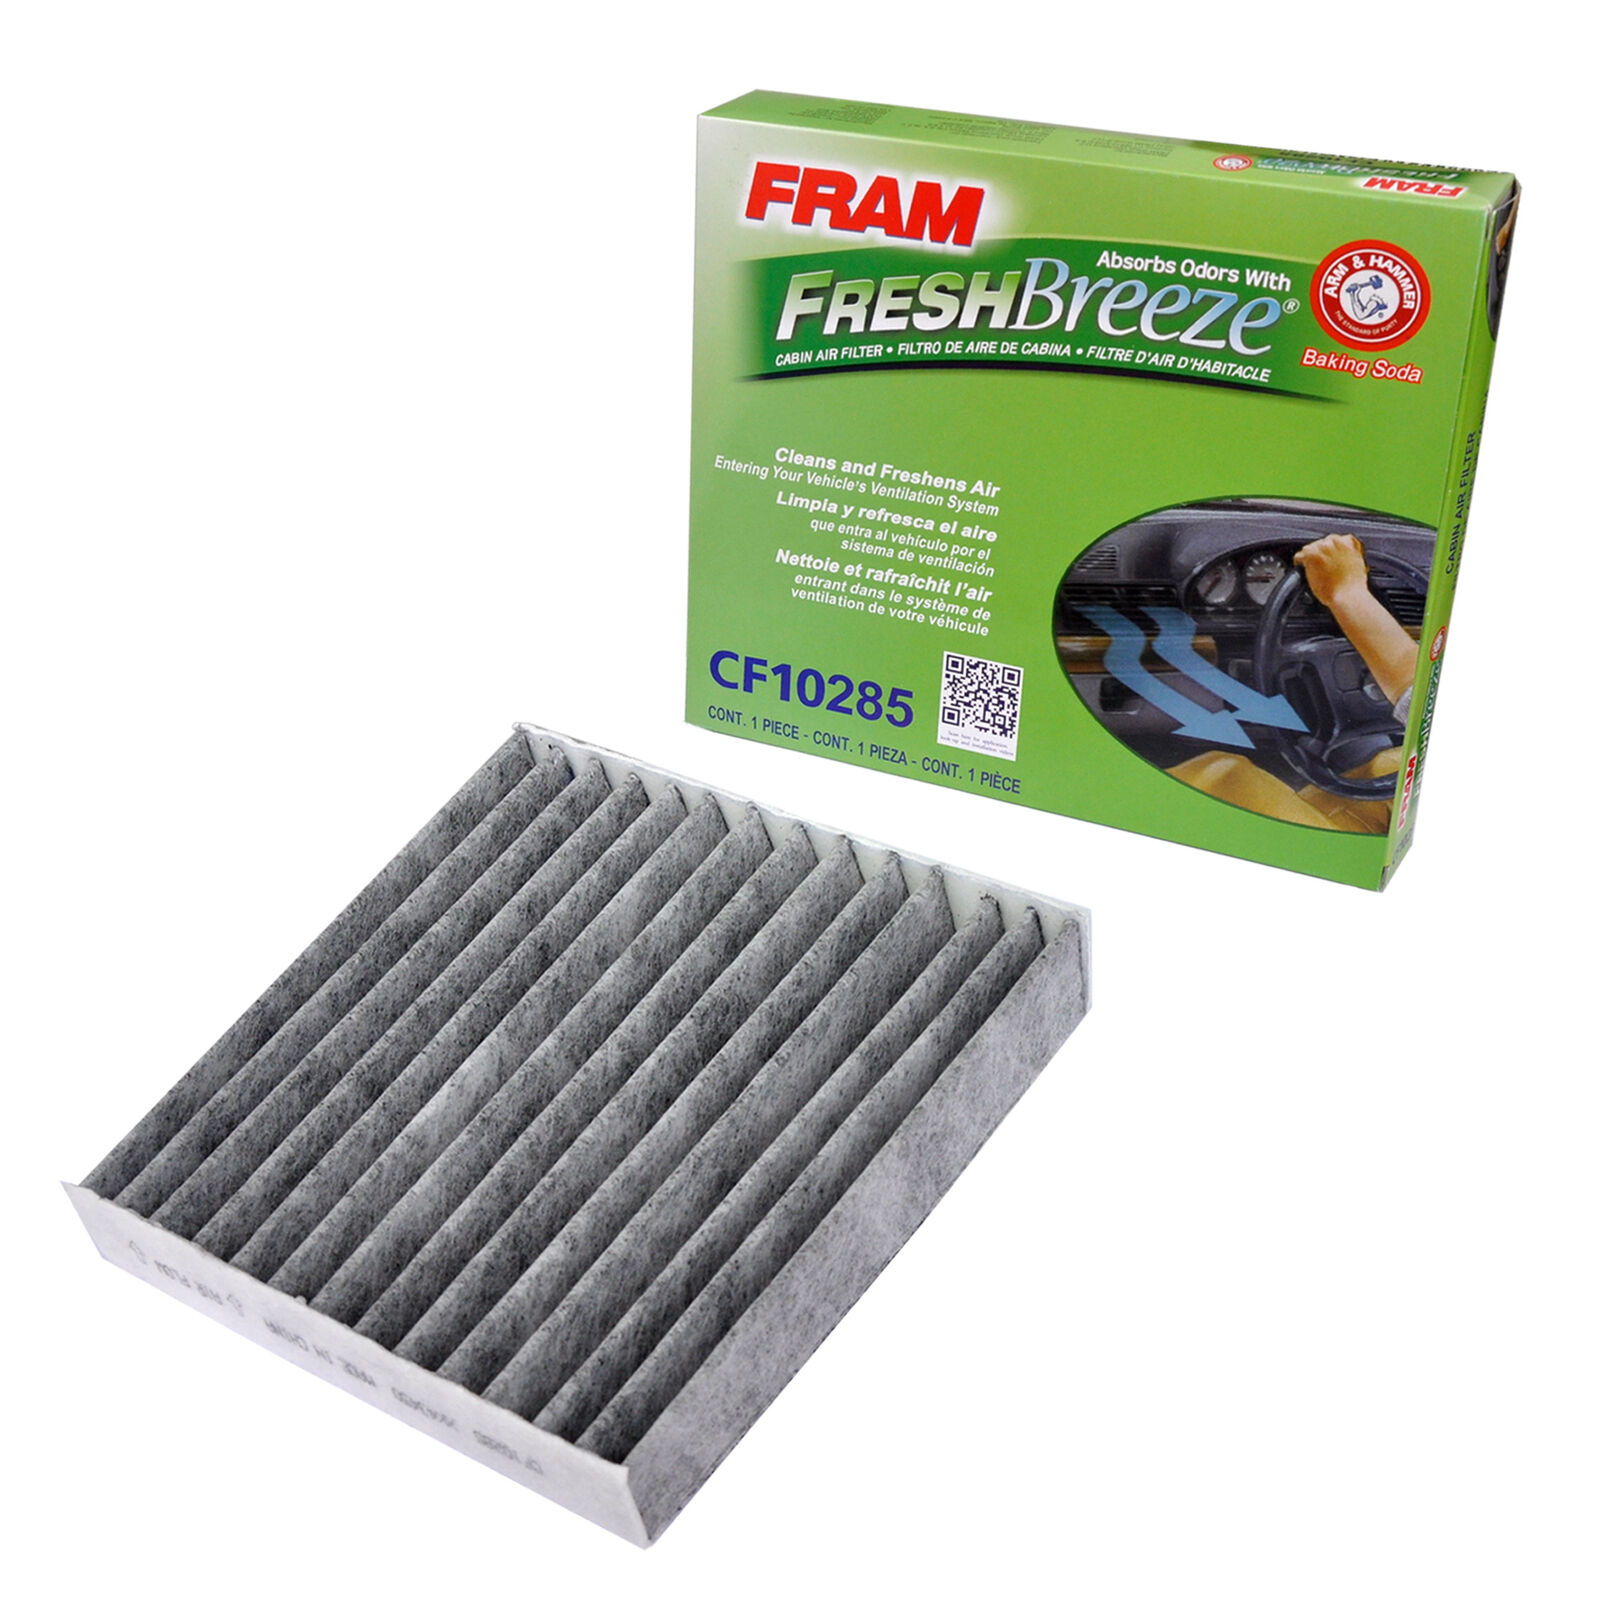 FRAM CF10285 Fresh Breeze Cabin Air Filter with Arm & Hammer NEW R-5